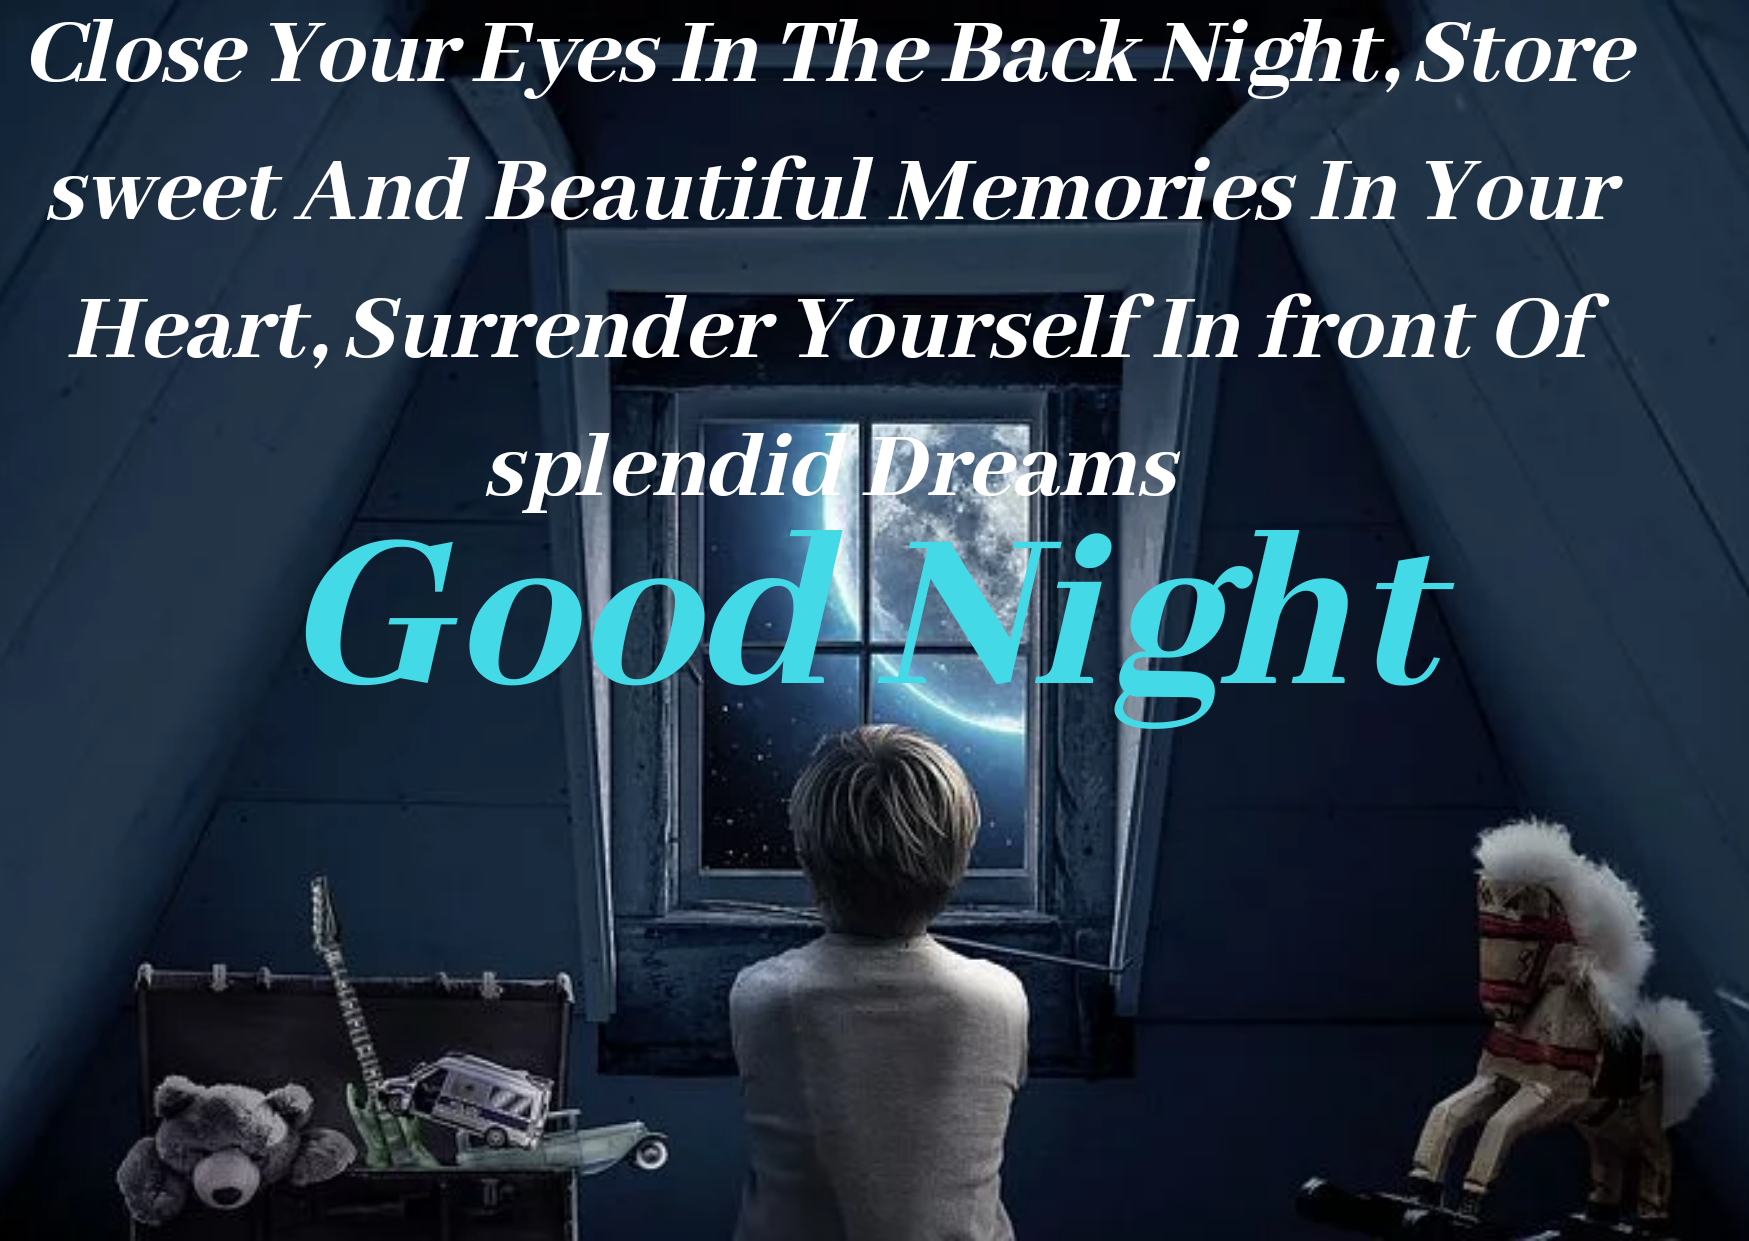 Good night status images, Best Beautiful Good Night English status, Good Night wishes massage, Good Night Images Picture, Photo, Quotes,